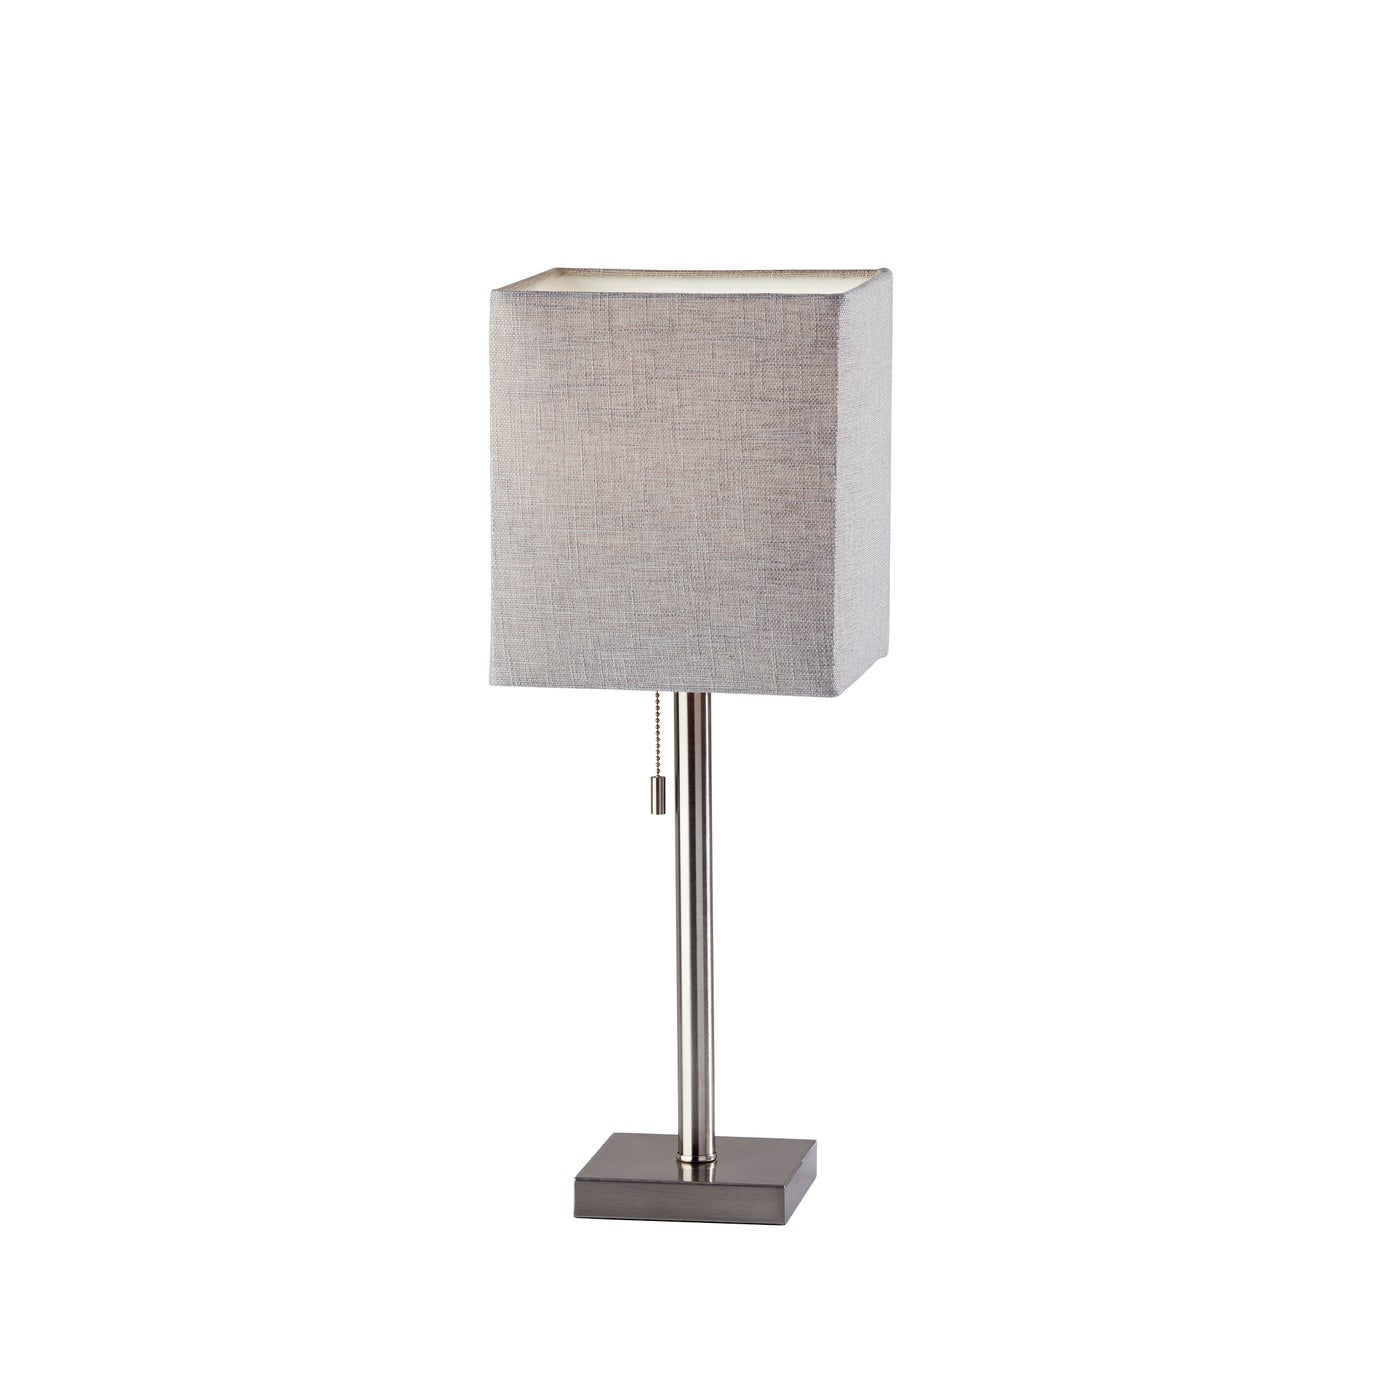 Adesso Home - 1566-22 - Table Lamp - Estelle - Brushed Steel